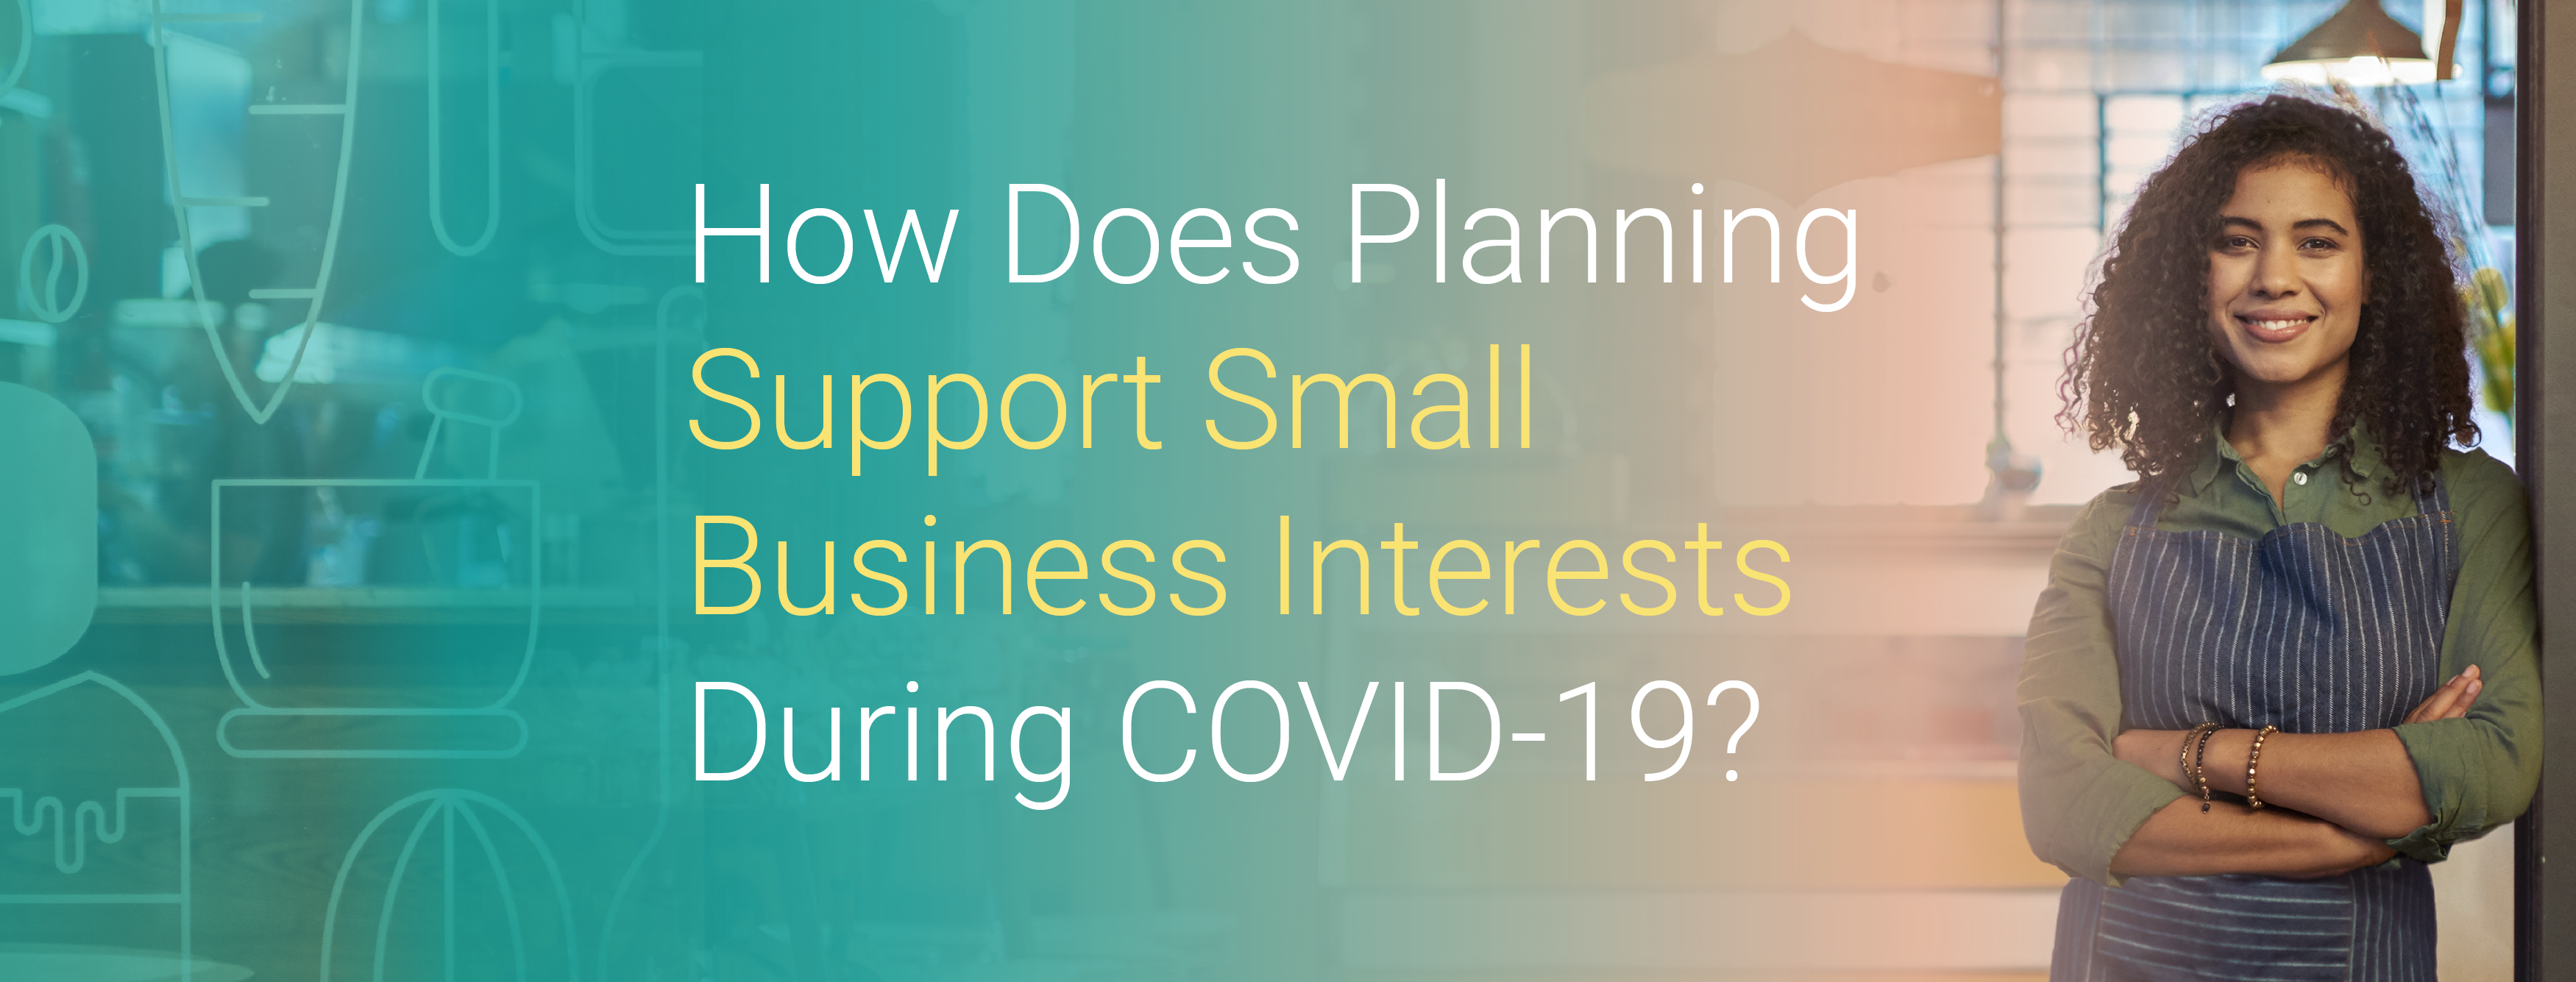 How Does Planning Support Small Business Interests During COVID-19?